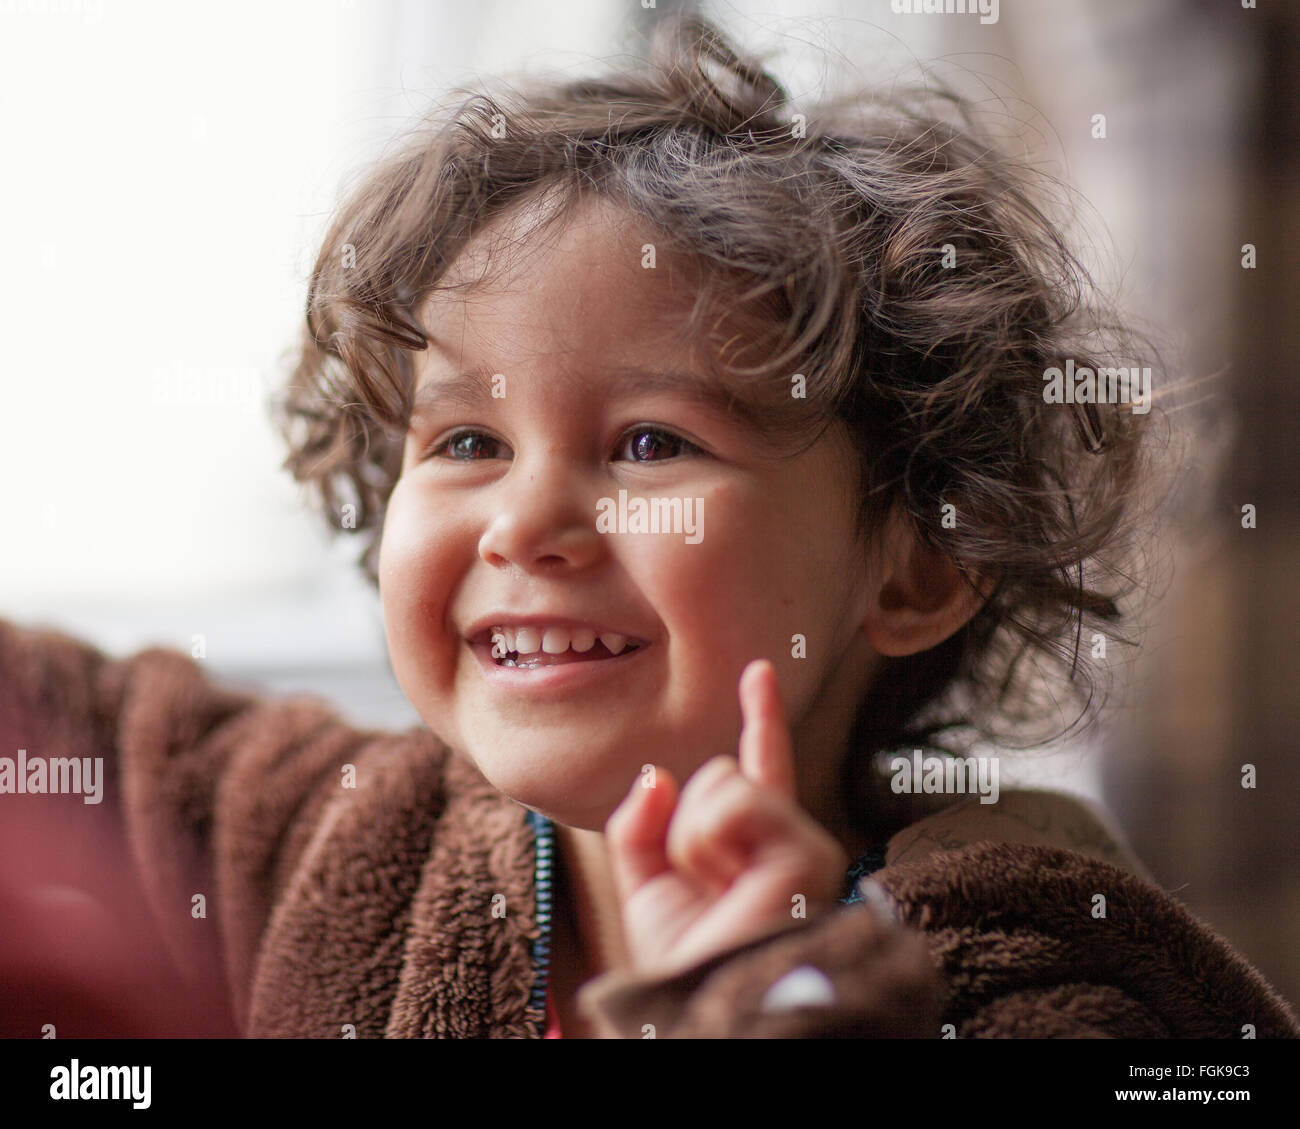 Mixed race three year old boy pointing or signaling,one. Stock Photo